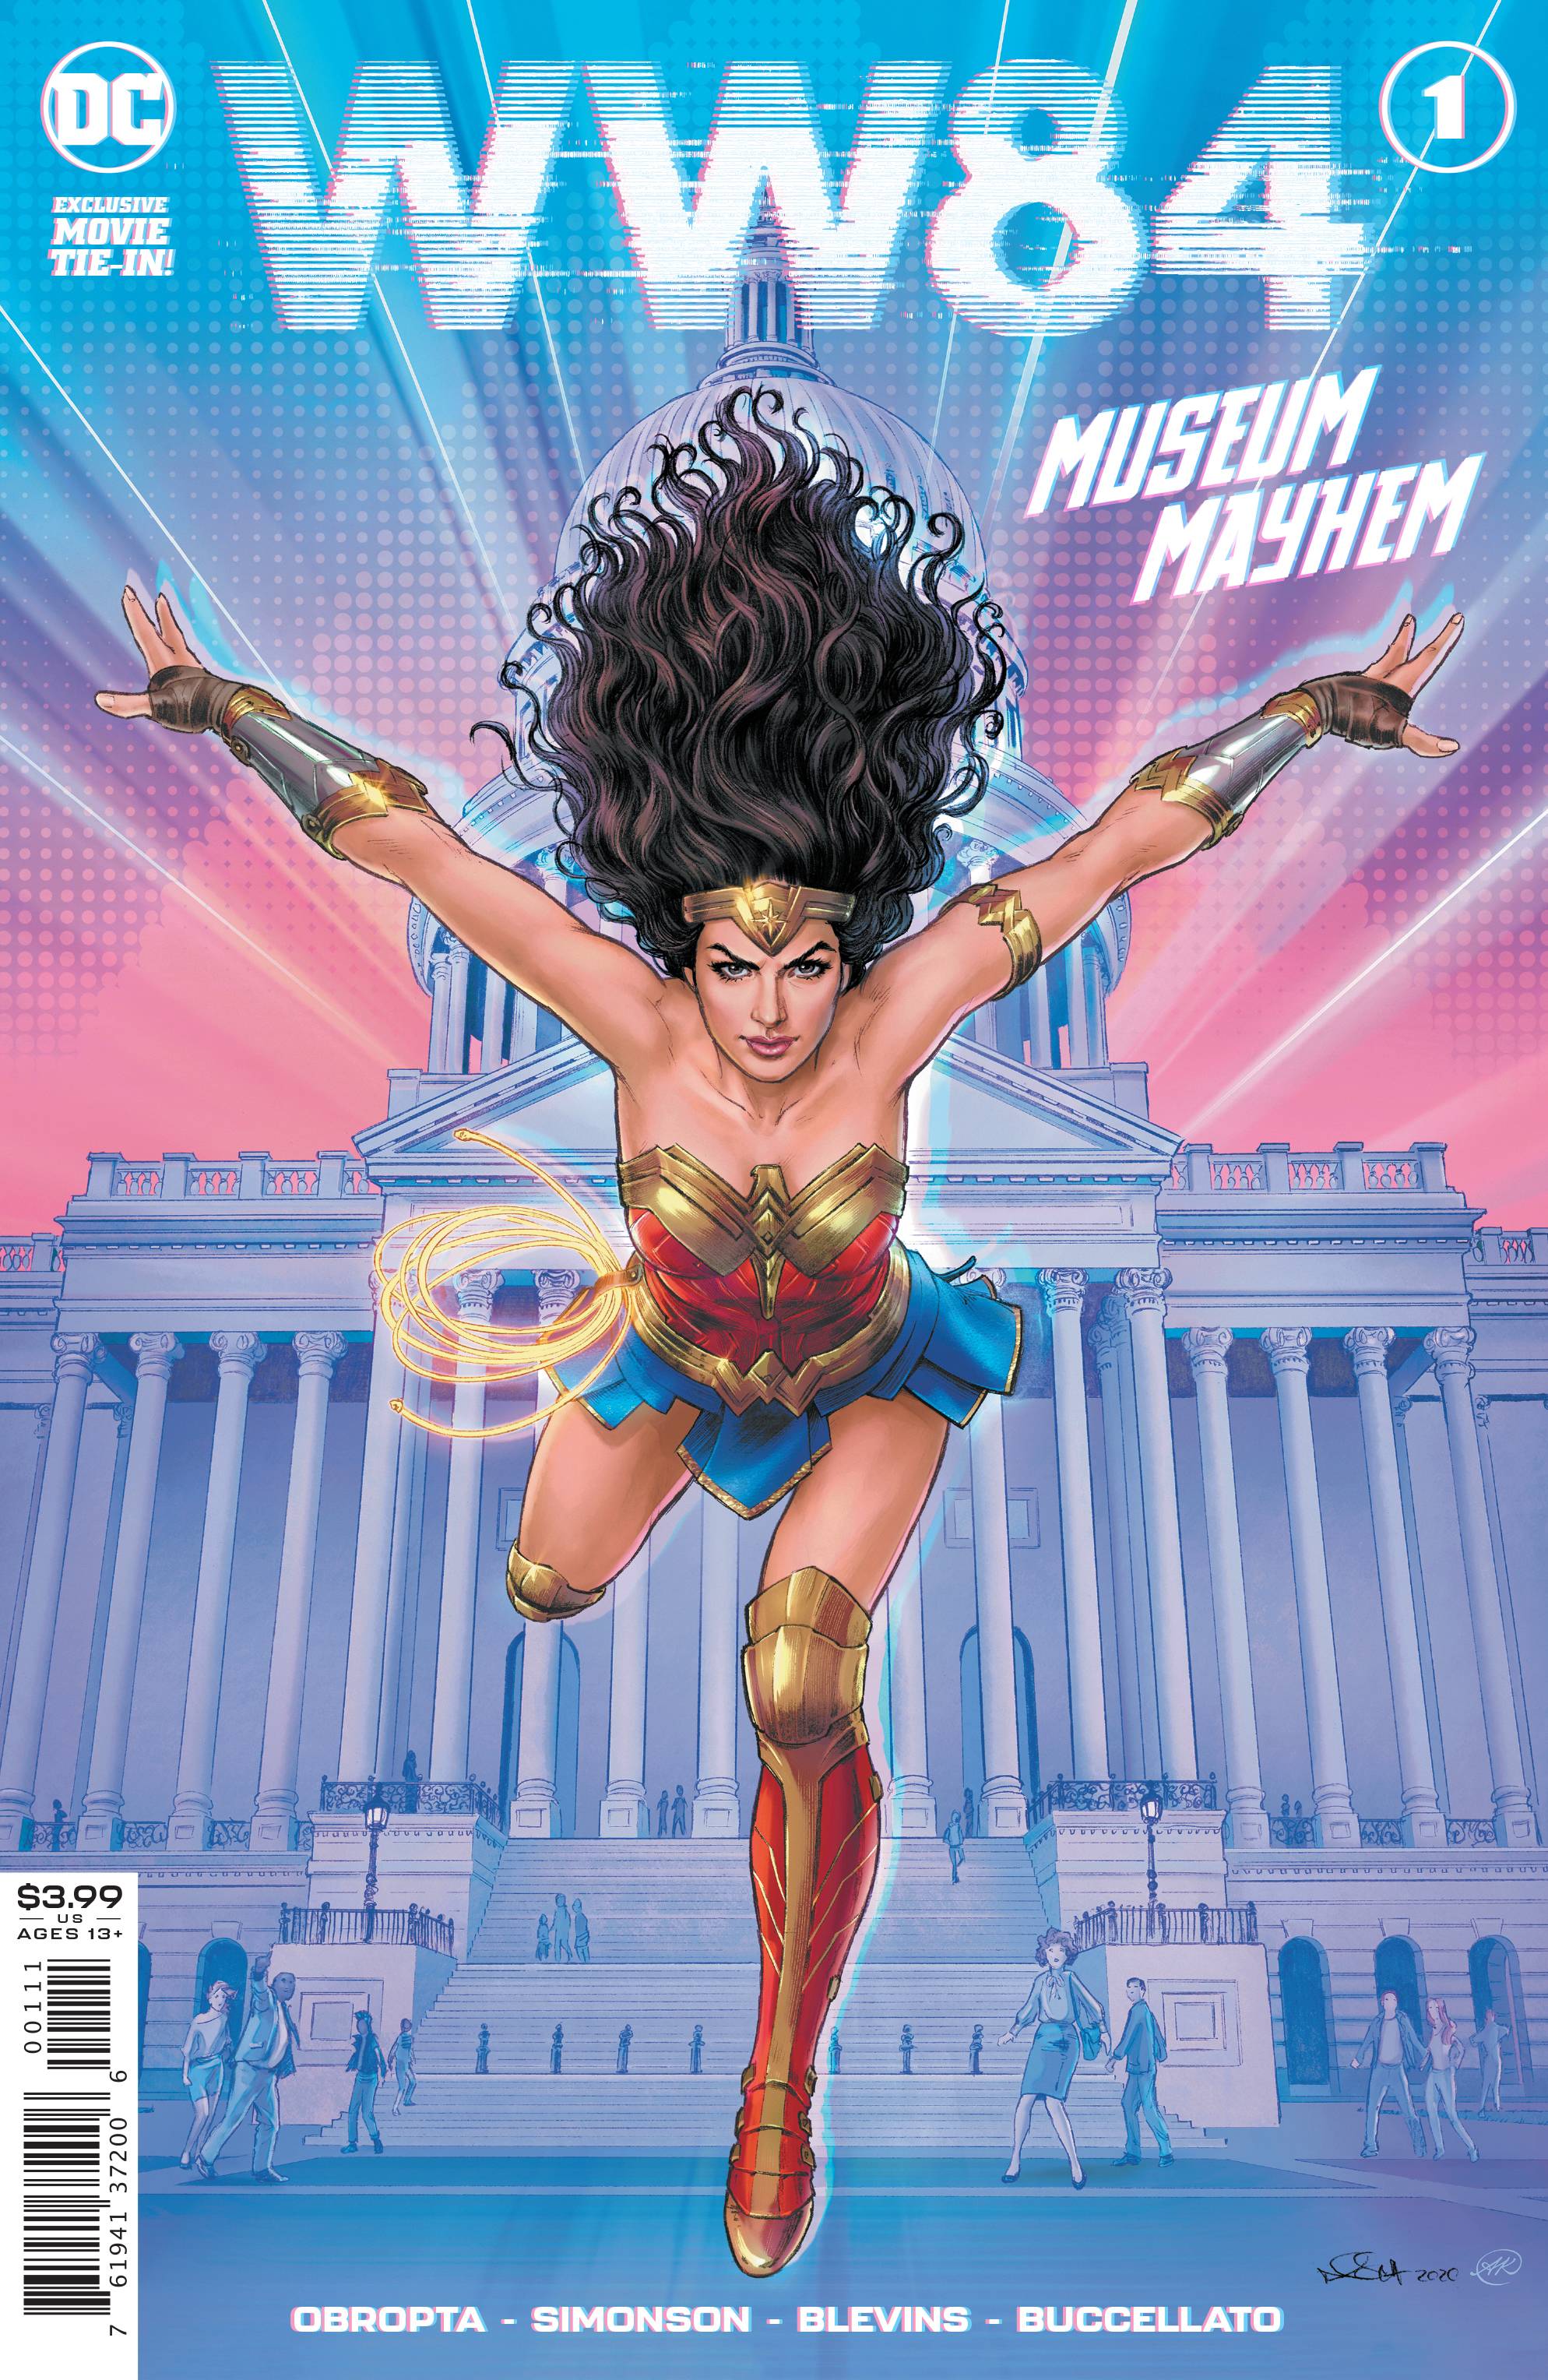 WONDER WOMAN 1984 #1 | Game Master's Emporium (The New GME)